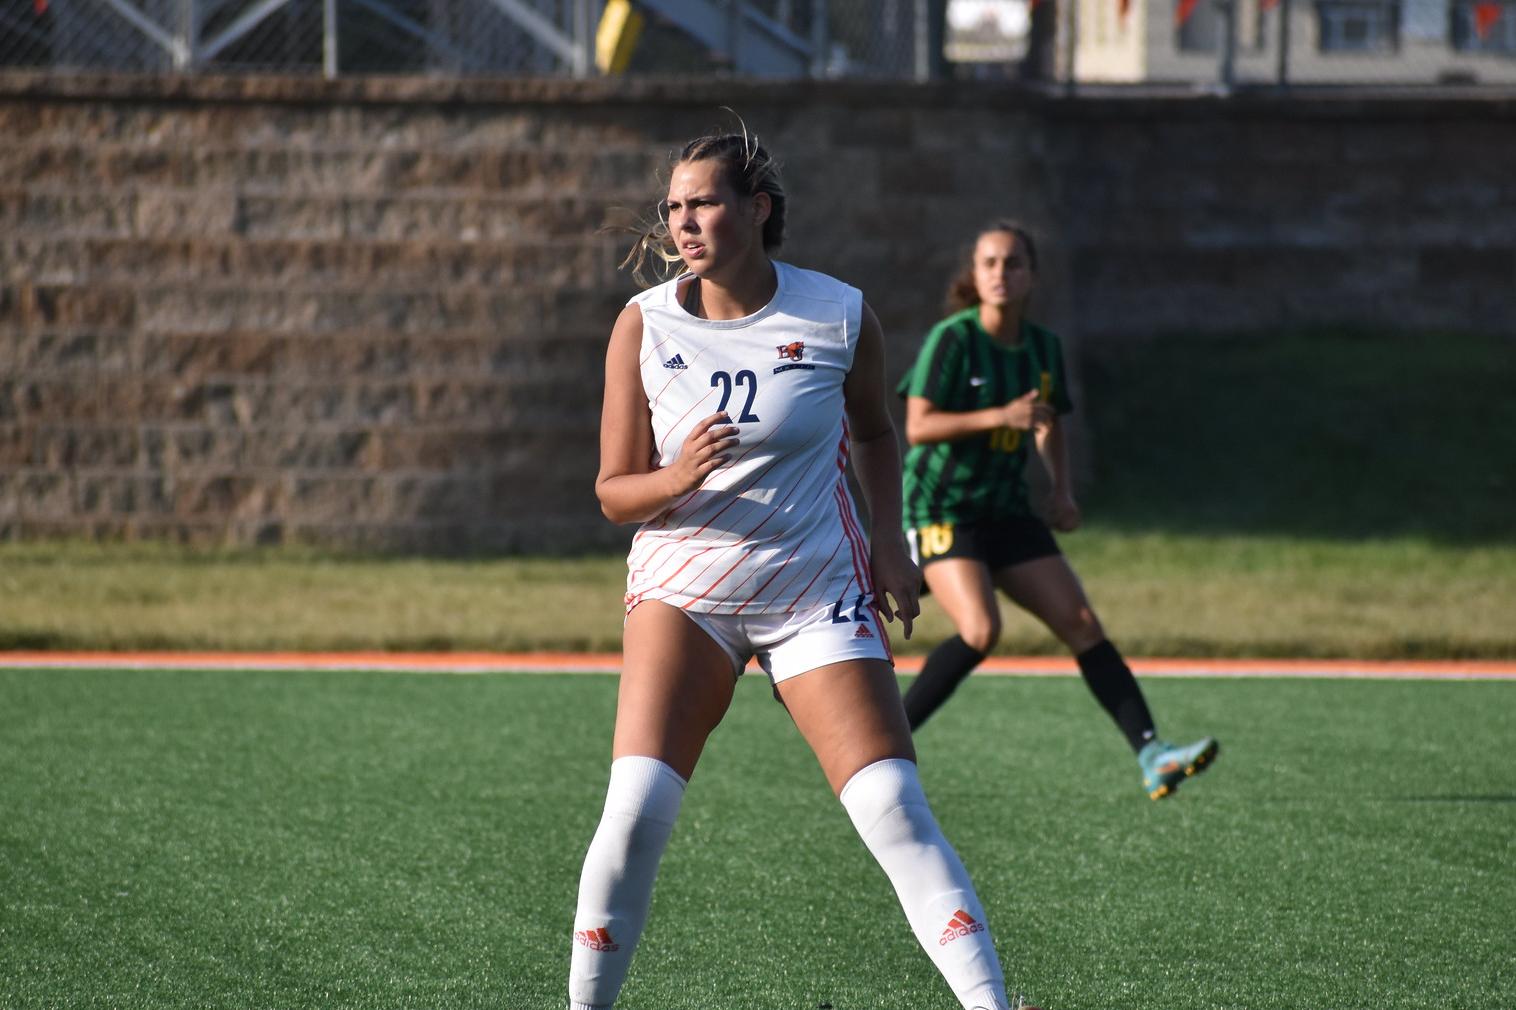 Wildcats Fall to No. 9 Central Methodist, 4-0 on the Road